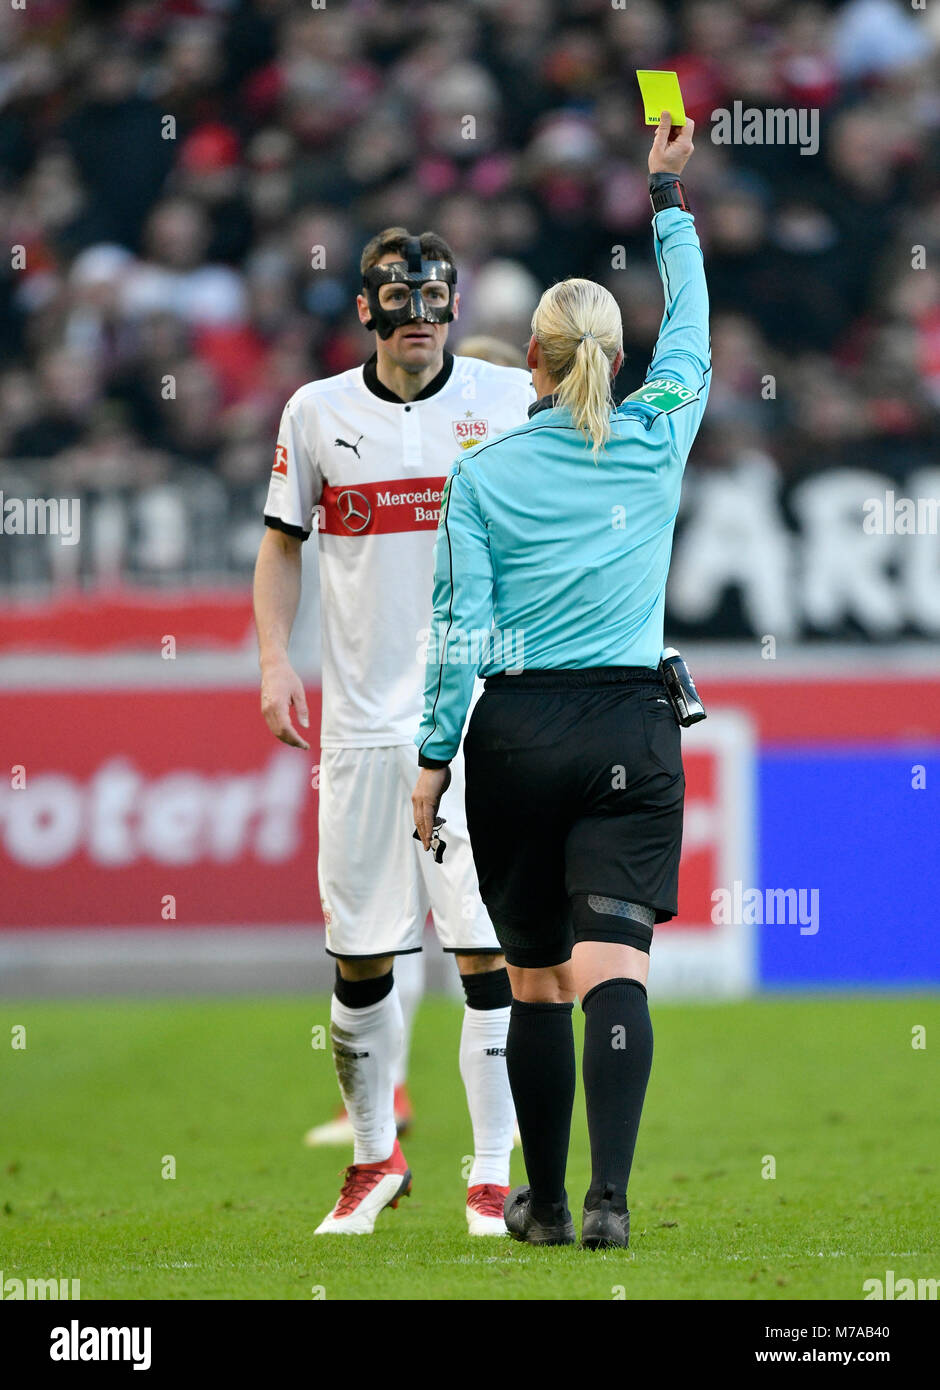 Referee Bibiana Steinhaus shows Christian Gentner of VfB Stuttgart with face mask the yellow card, Mercedes-Benz Arena Stock Photo